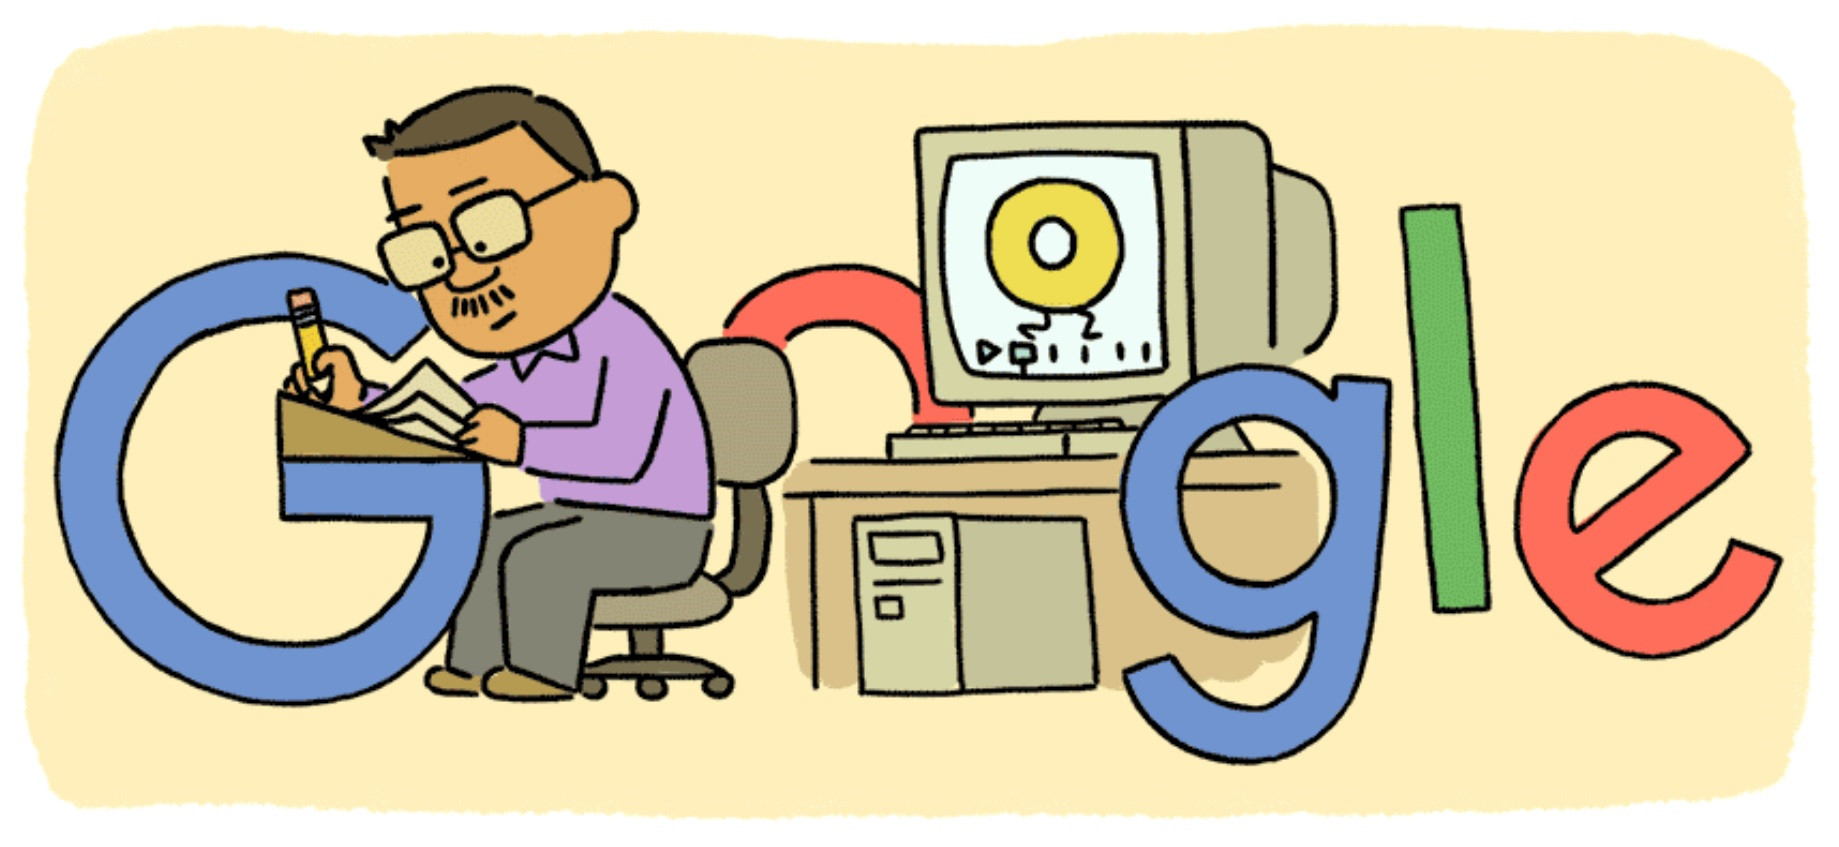 Google Doodle Honours Malaysia's Animation Pioneer Kamn Ismail 